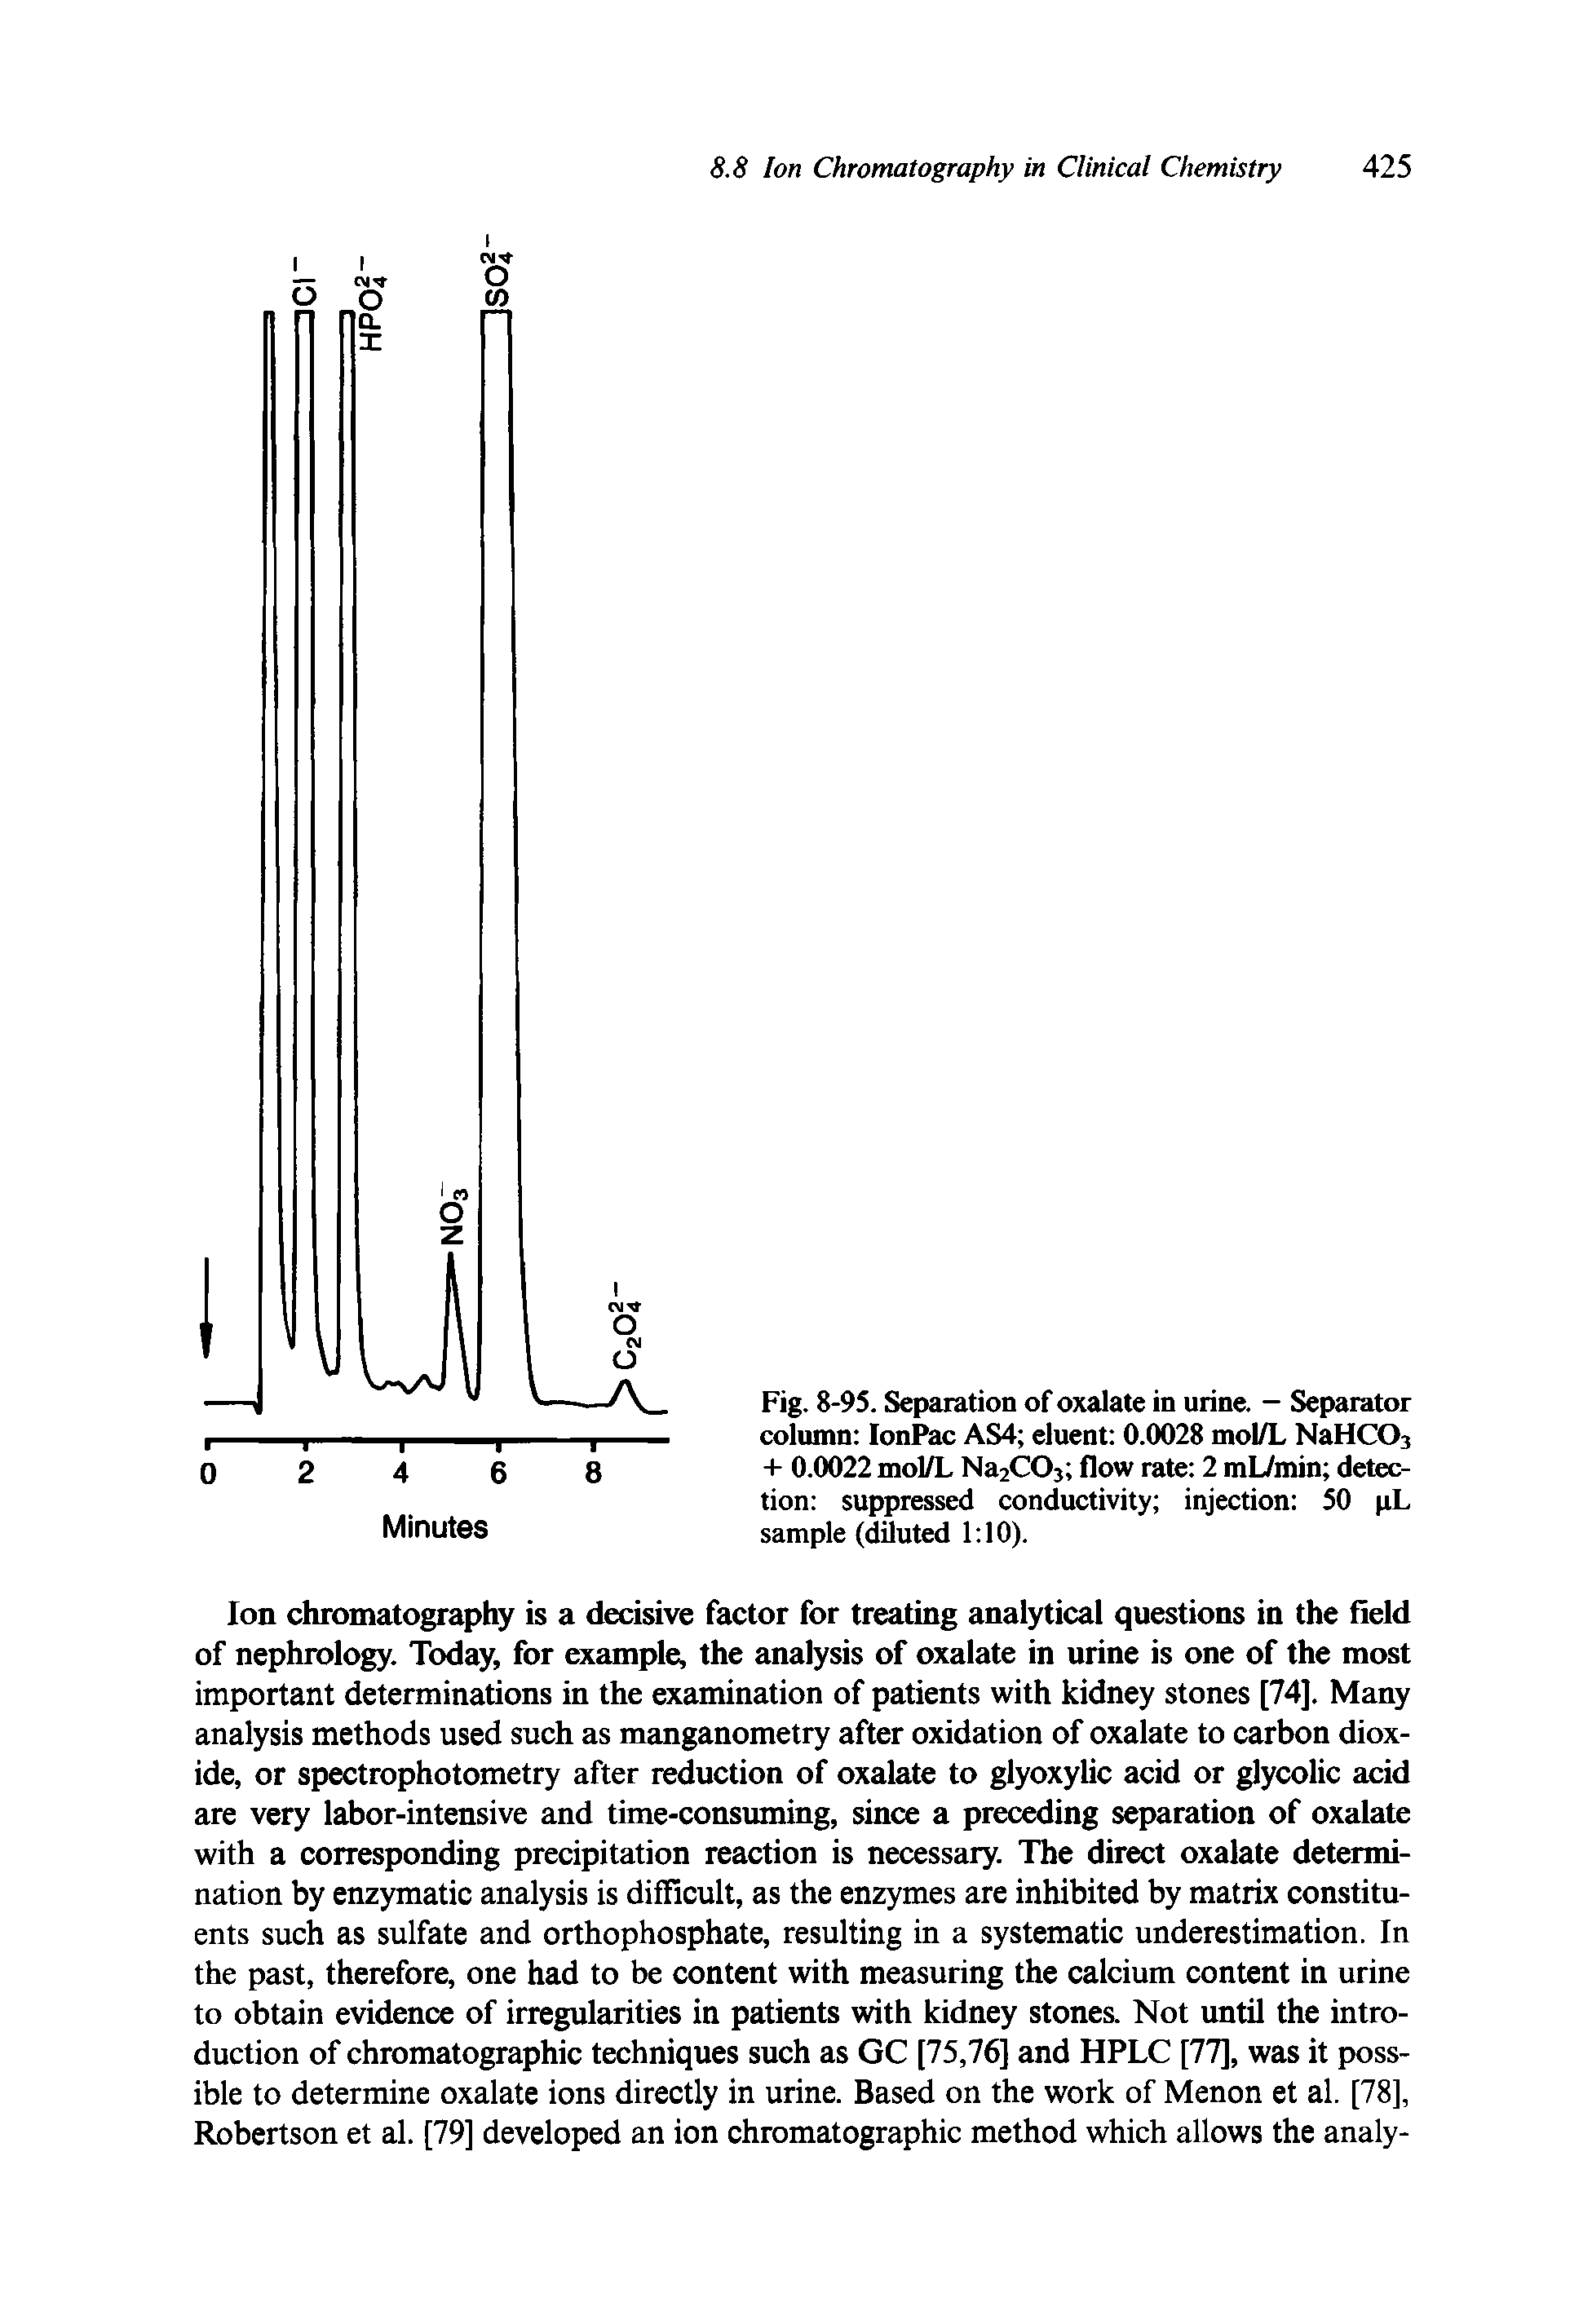 Fig. 8-95. Separation of oxalate in urine. - Separator column IonPac AS4 eluent 0.0028 mol/L NaHC03 + 0.0022 mol/L Na2C03 flow rate 2 mL/min detection suppressed conductivity injection 50 pL sample (diluted 1 10).